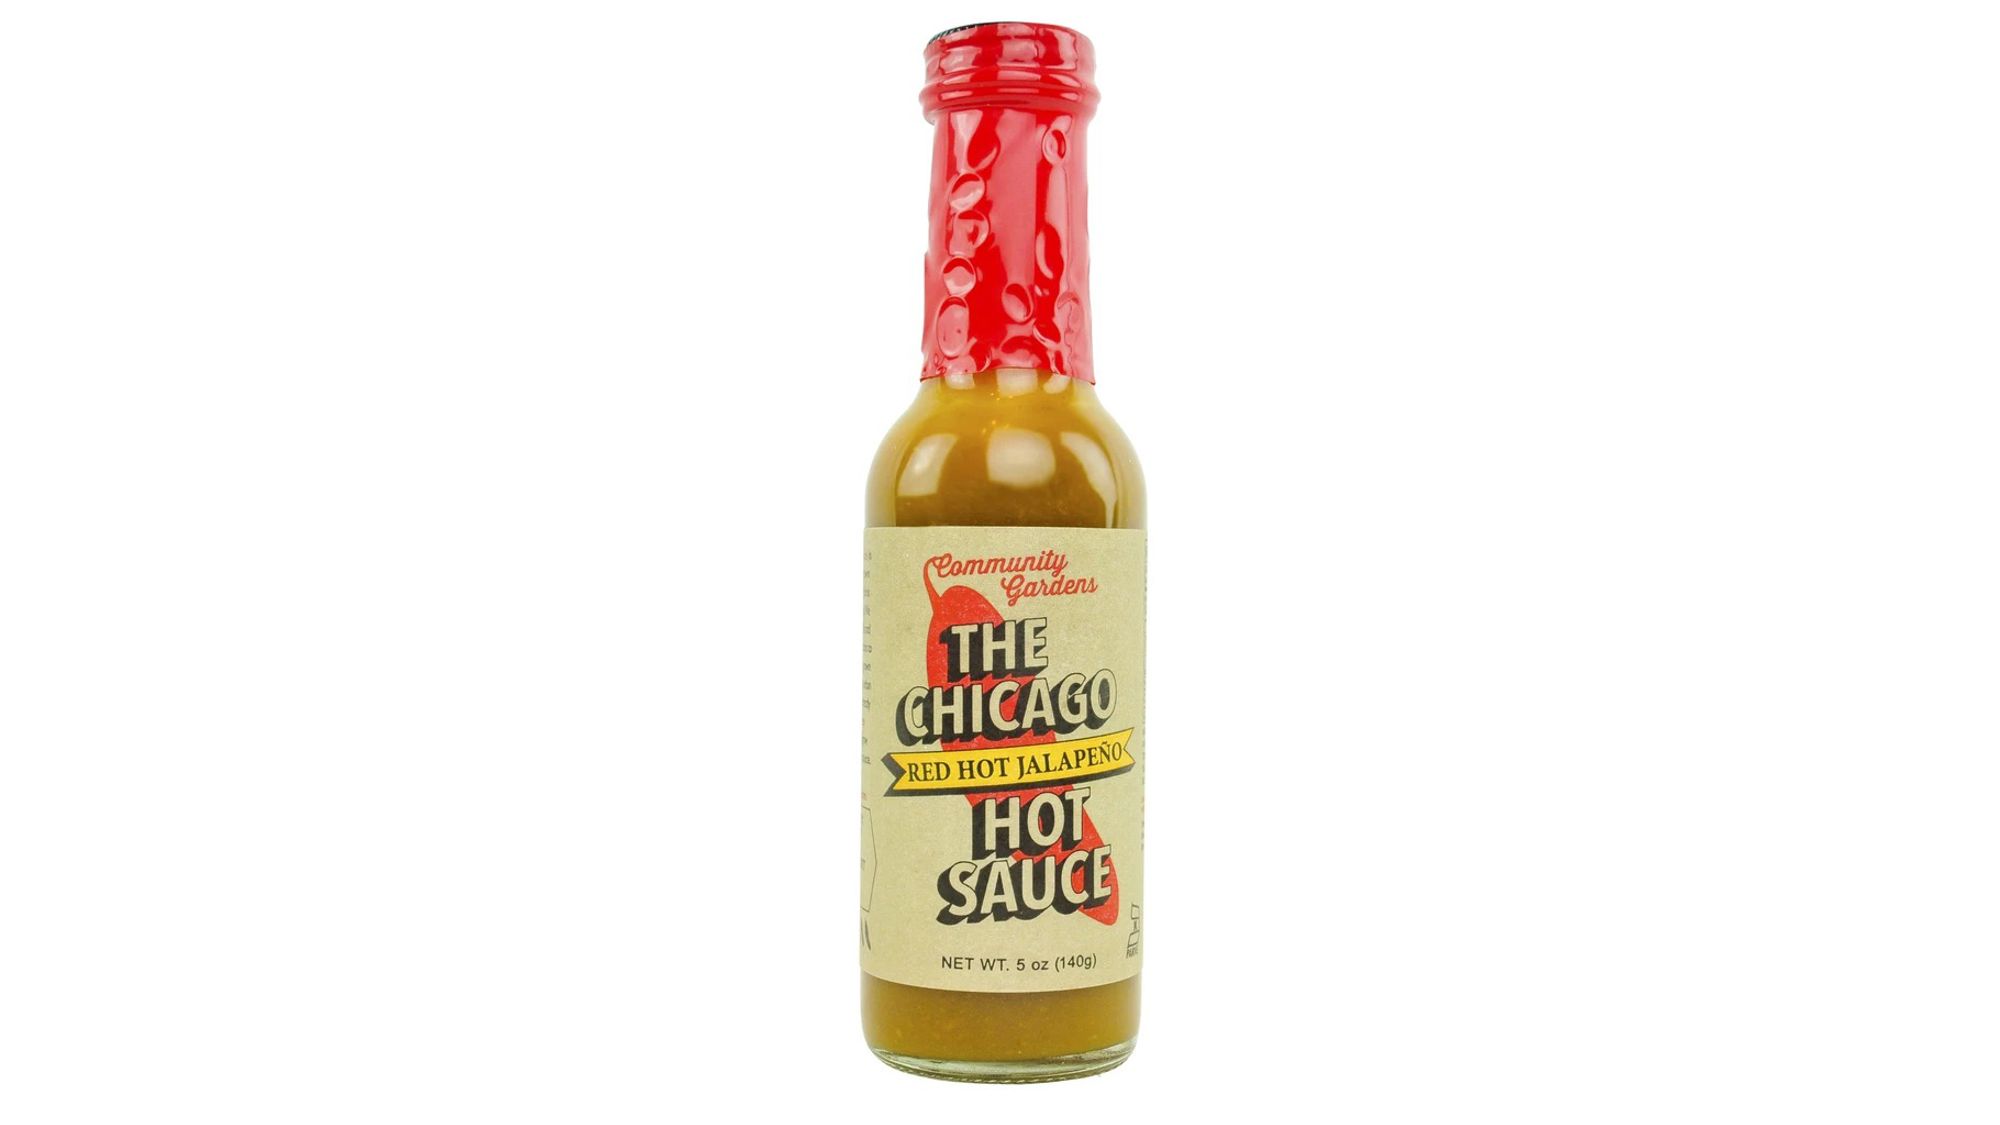 The Chicago Red Hot Jalapeño